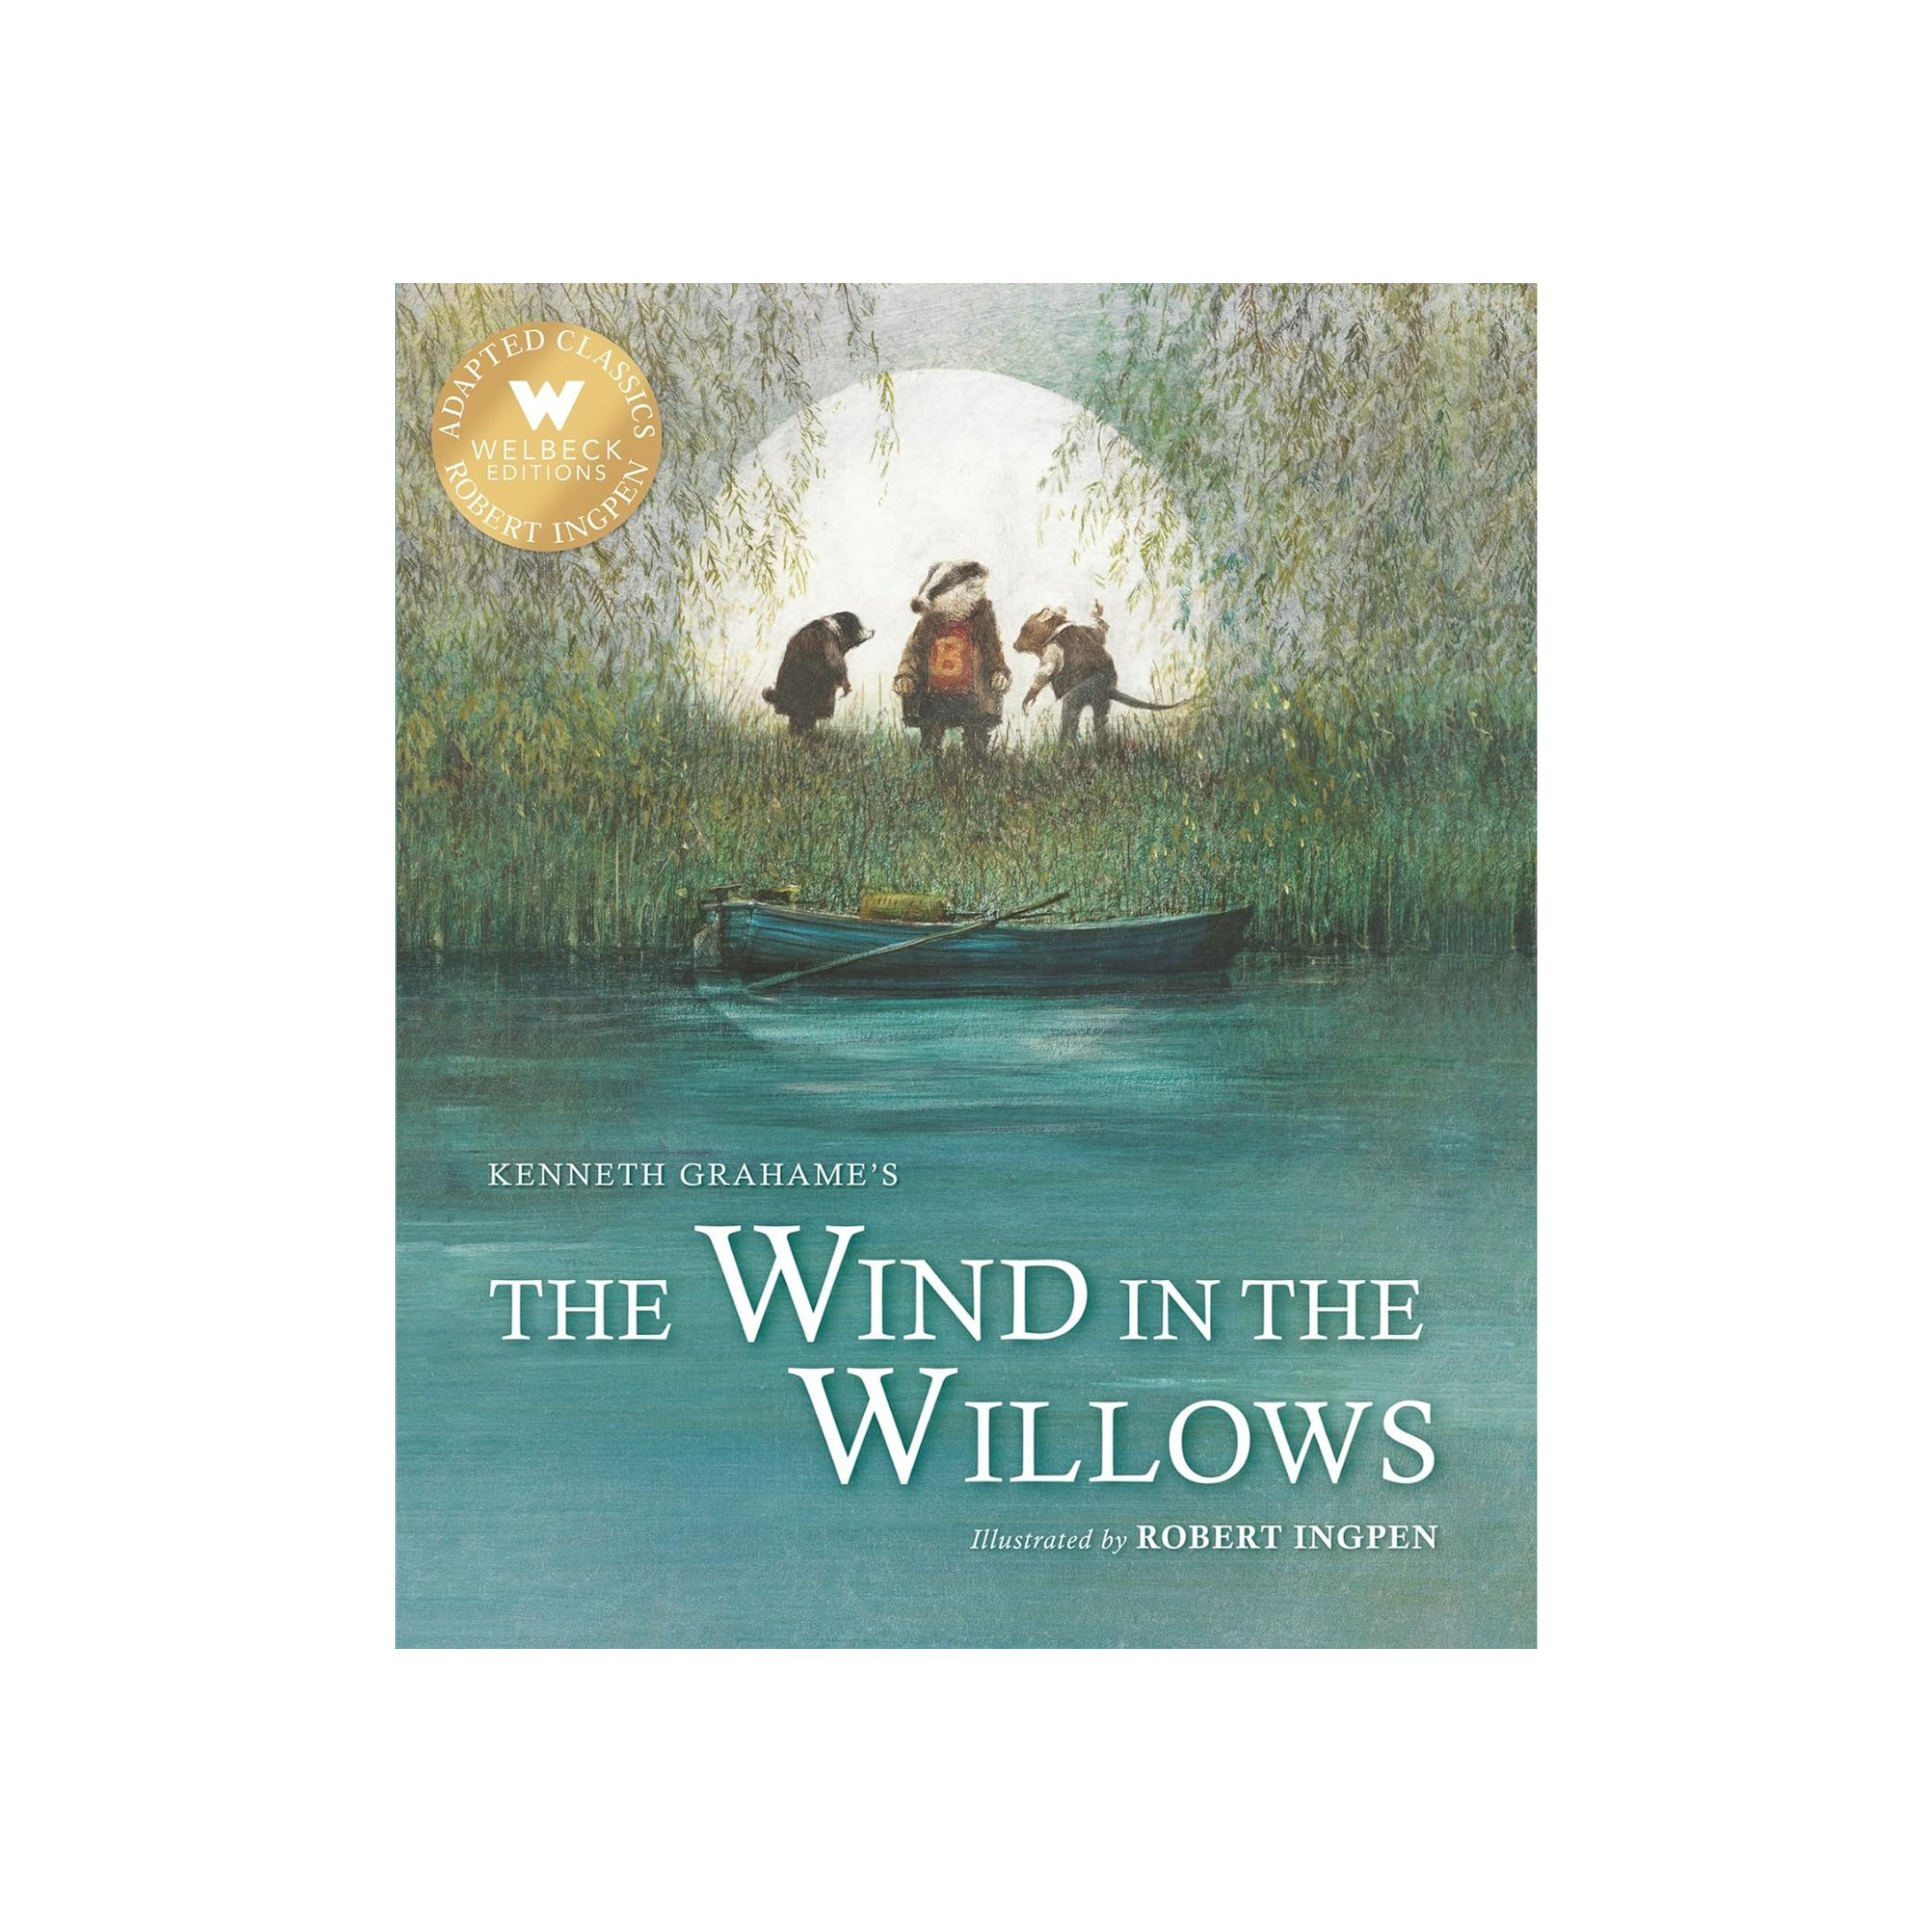 The Wind in the Willows: A Robert Ingpen